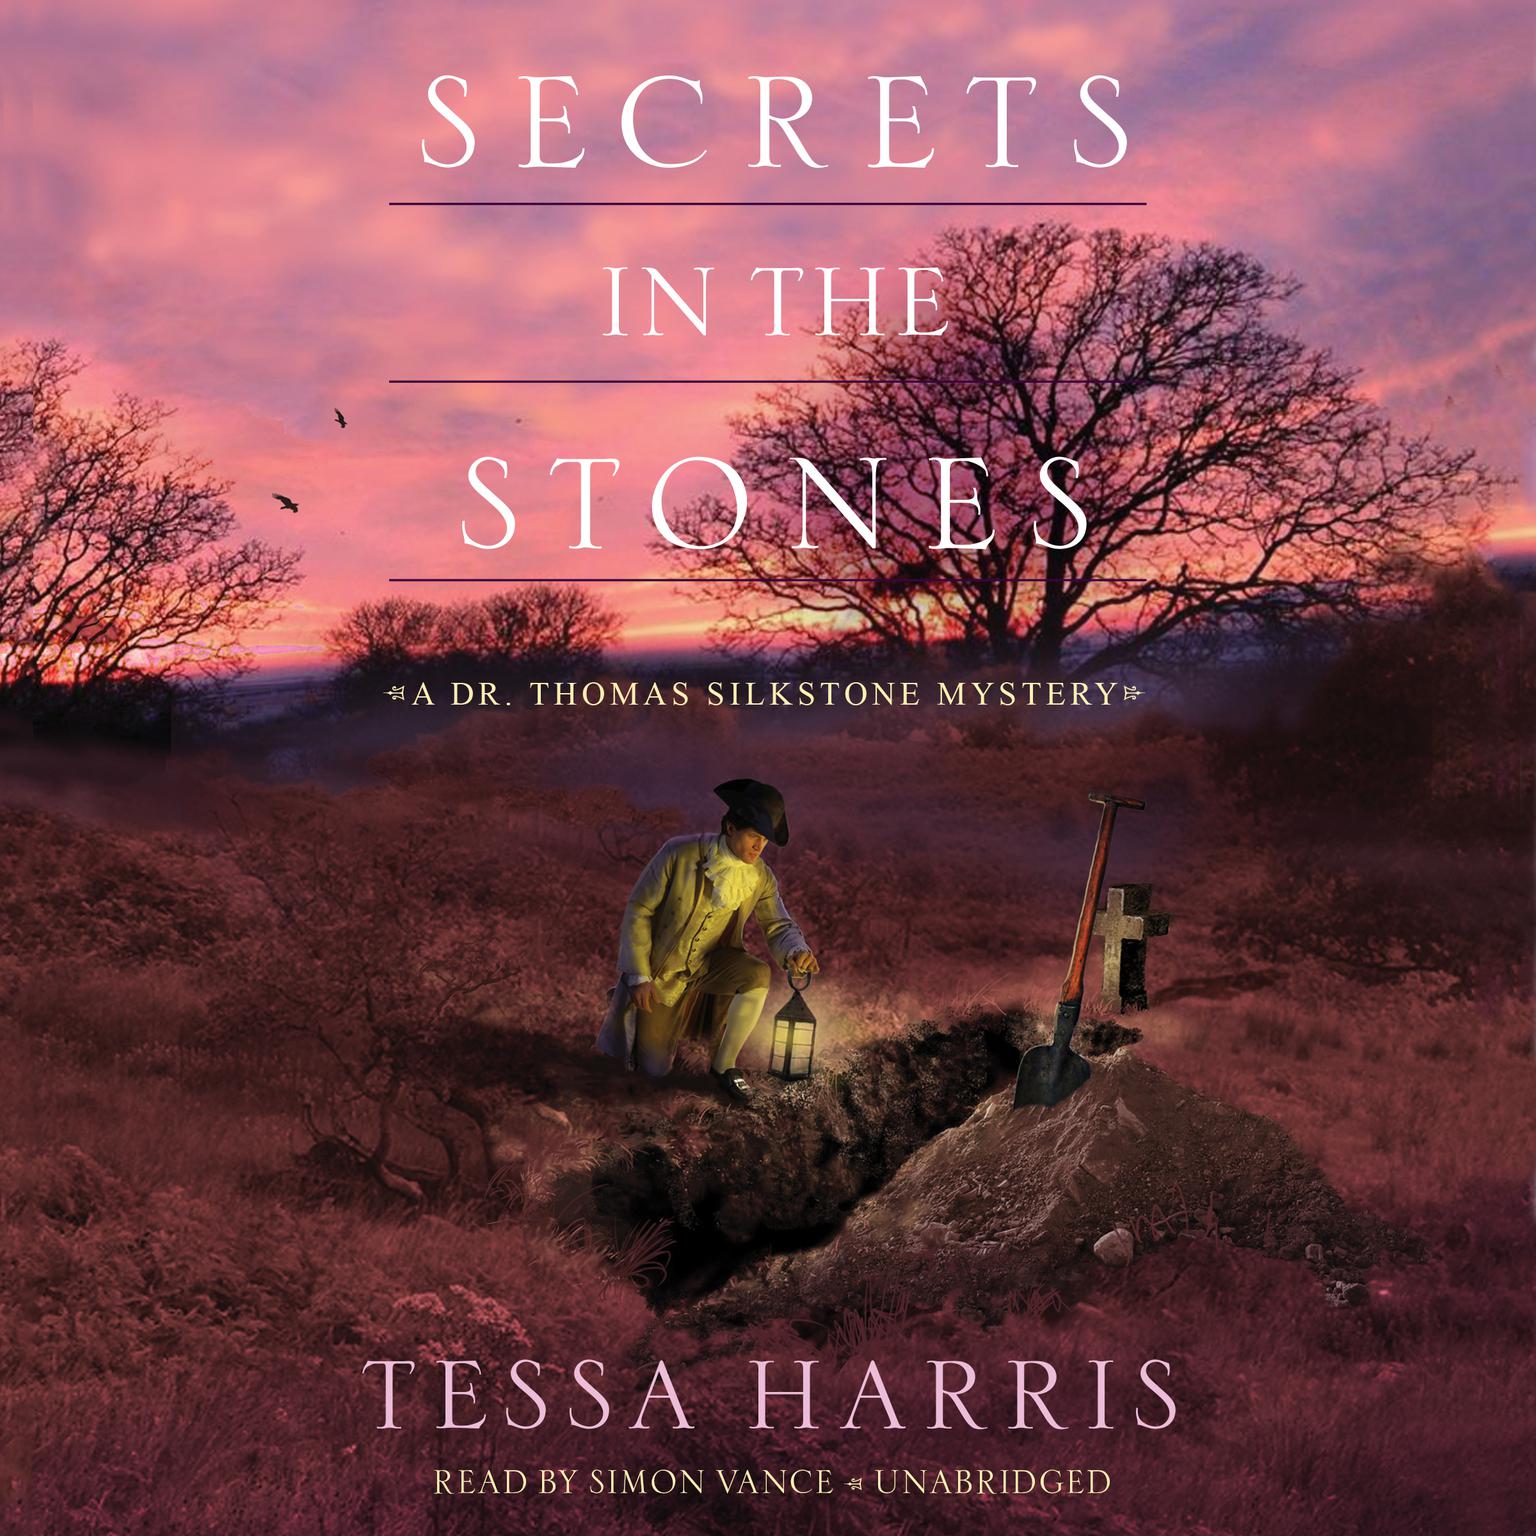 Secrets in the Stones: A Dr. Thomas Silkstone Mystery Audiobook, by Tessa Harris